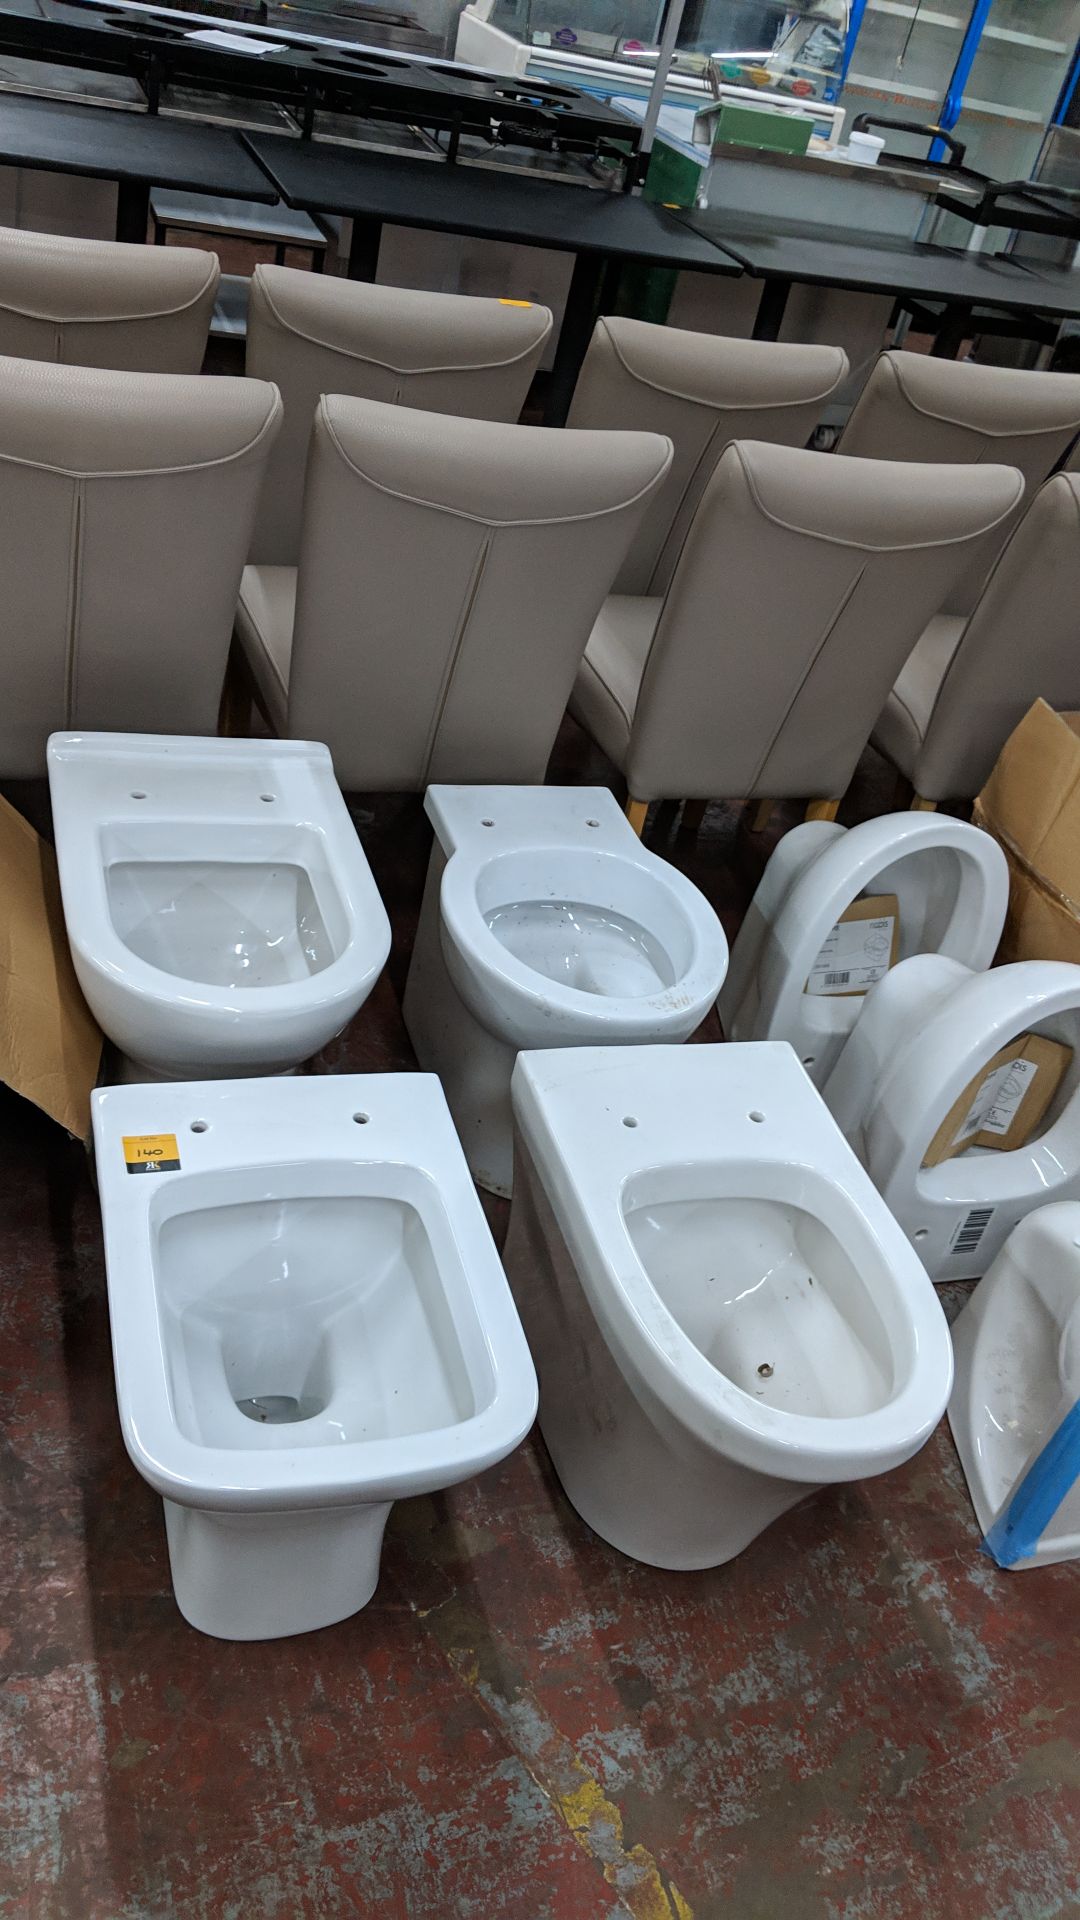 4 off assorted back-to-wall WC pans Lots 100 - 142 & 146 - 167 are being sold on behalf of a - Bild 7 aus 7